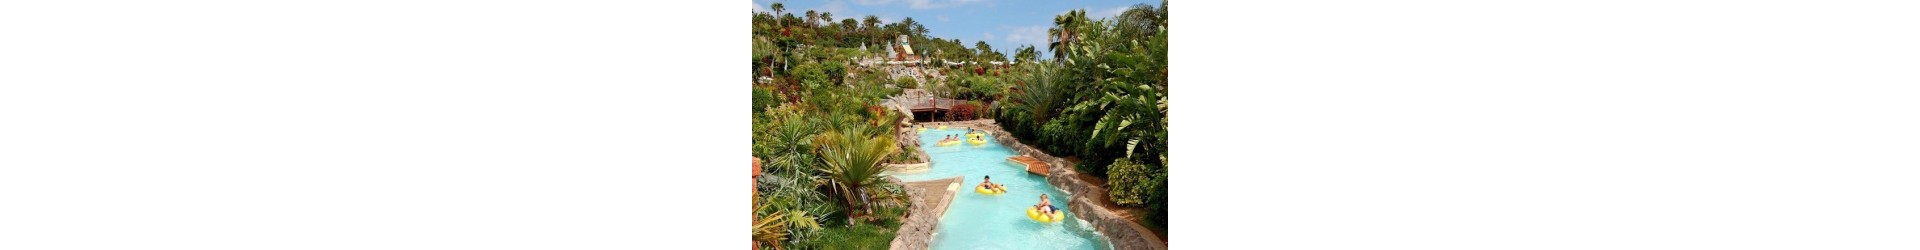 Water Park Attractions - Fun and Thrills in the Water! AVEMTO